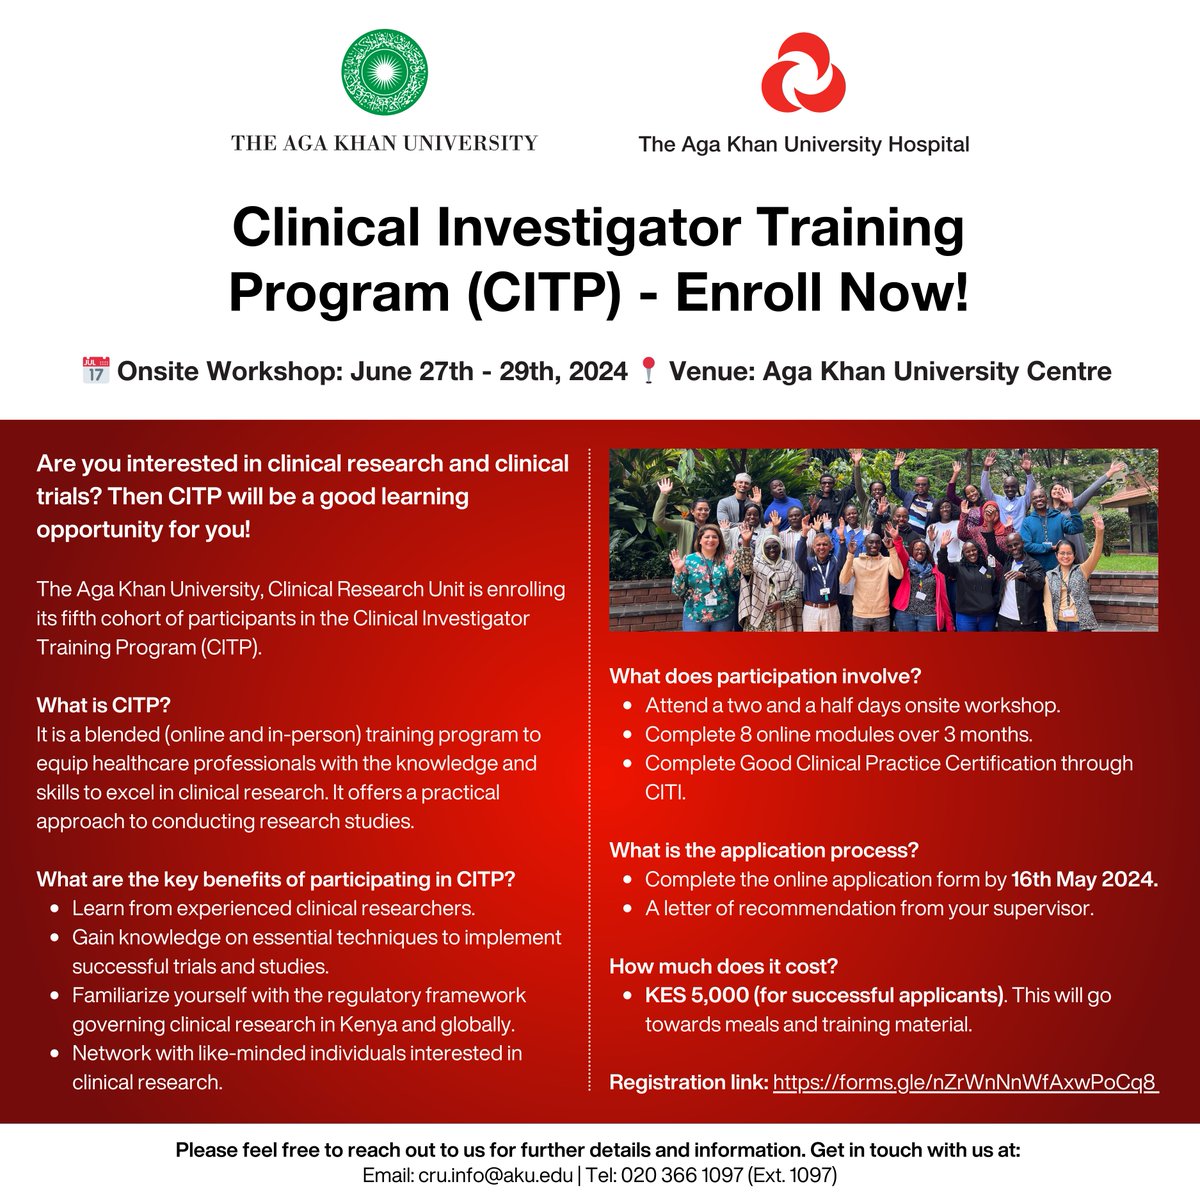 Gain knowledge on essential techniques to implement successful trials and studies and learn from experienced clinical researchers. Enroll now for AKU’s Clinical Investigator Training Programme (CITP) programme at our Nairobi campus here: forms.gle/nZrWnNnWfAxwPo…